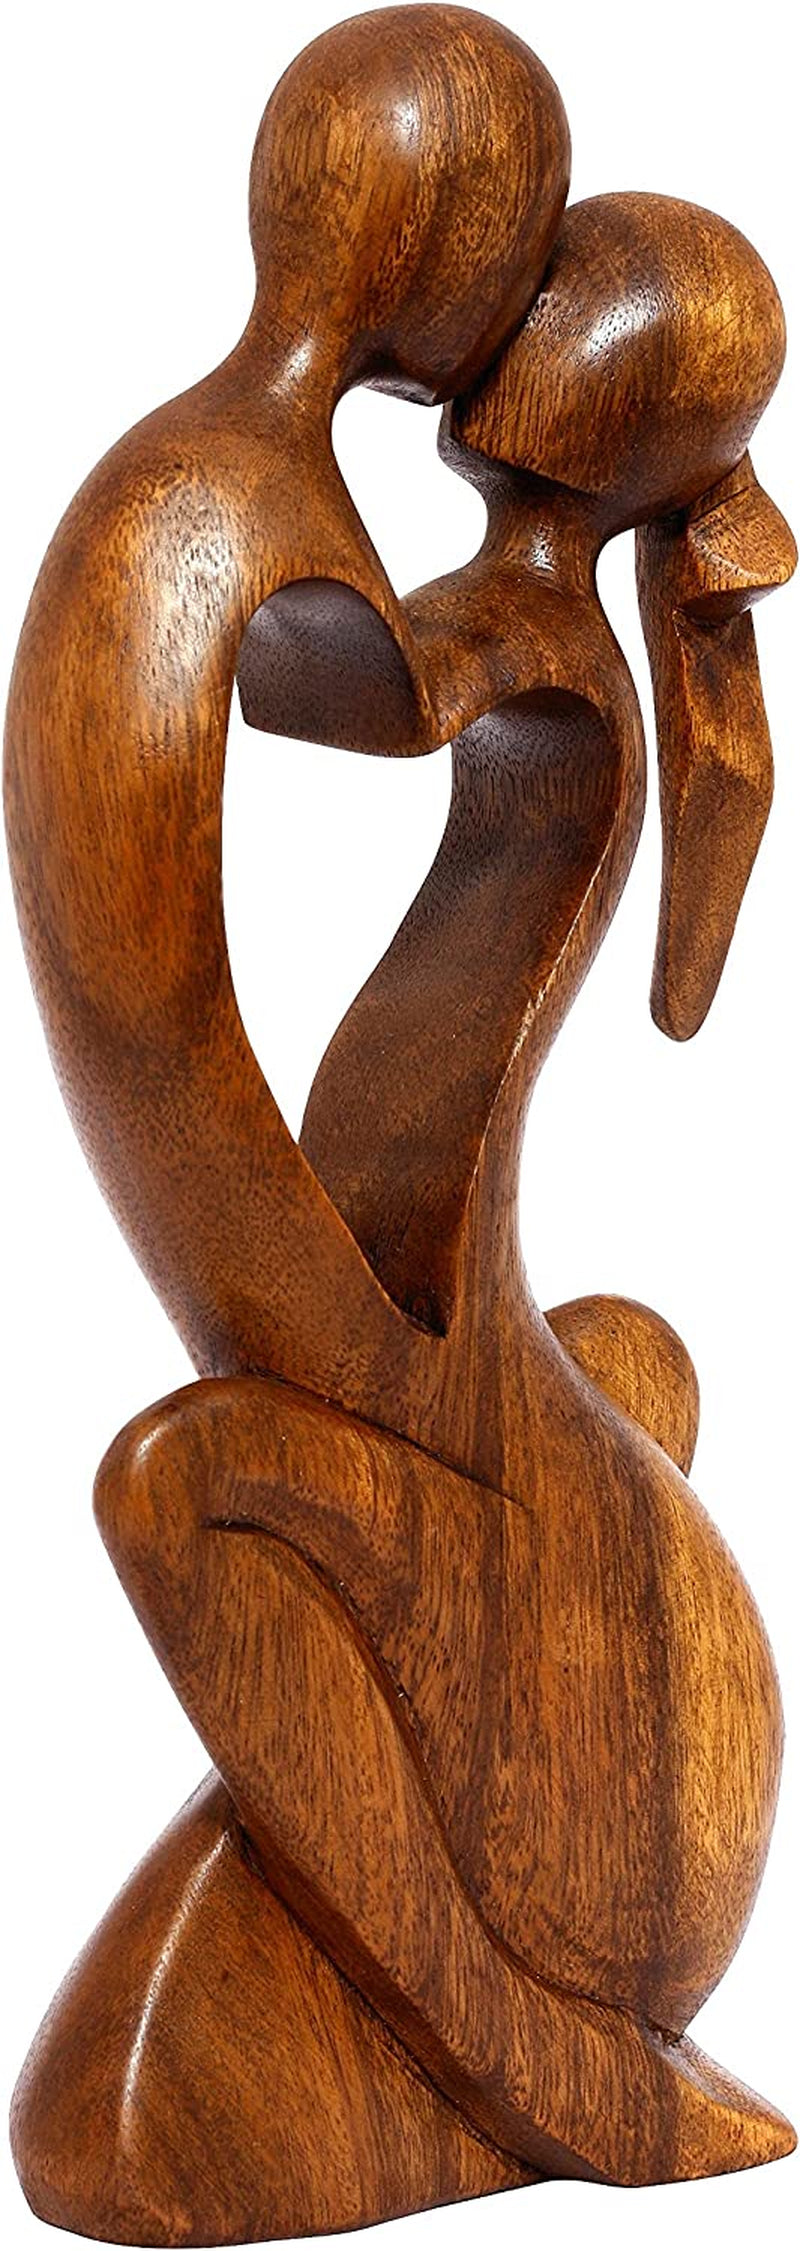 G6 Collection 12" Wooden Handmade Abstract Sculpture Statue Handcrafted - Endless Love - Gift Art Decorative Home Decor Figurine Accent Decoration Artwork Handcarved Endless Love Home & Garden > Decor > Seasonal & Holiday Decorations G6 Collection   